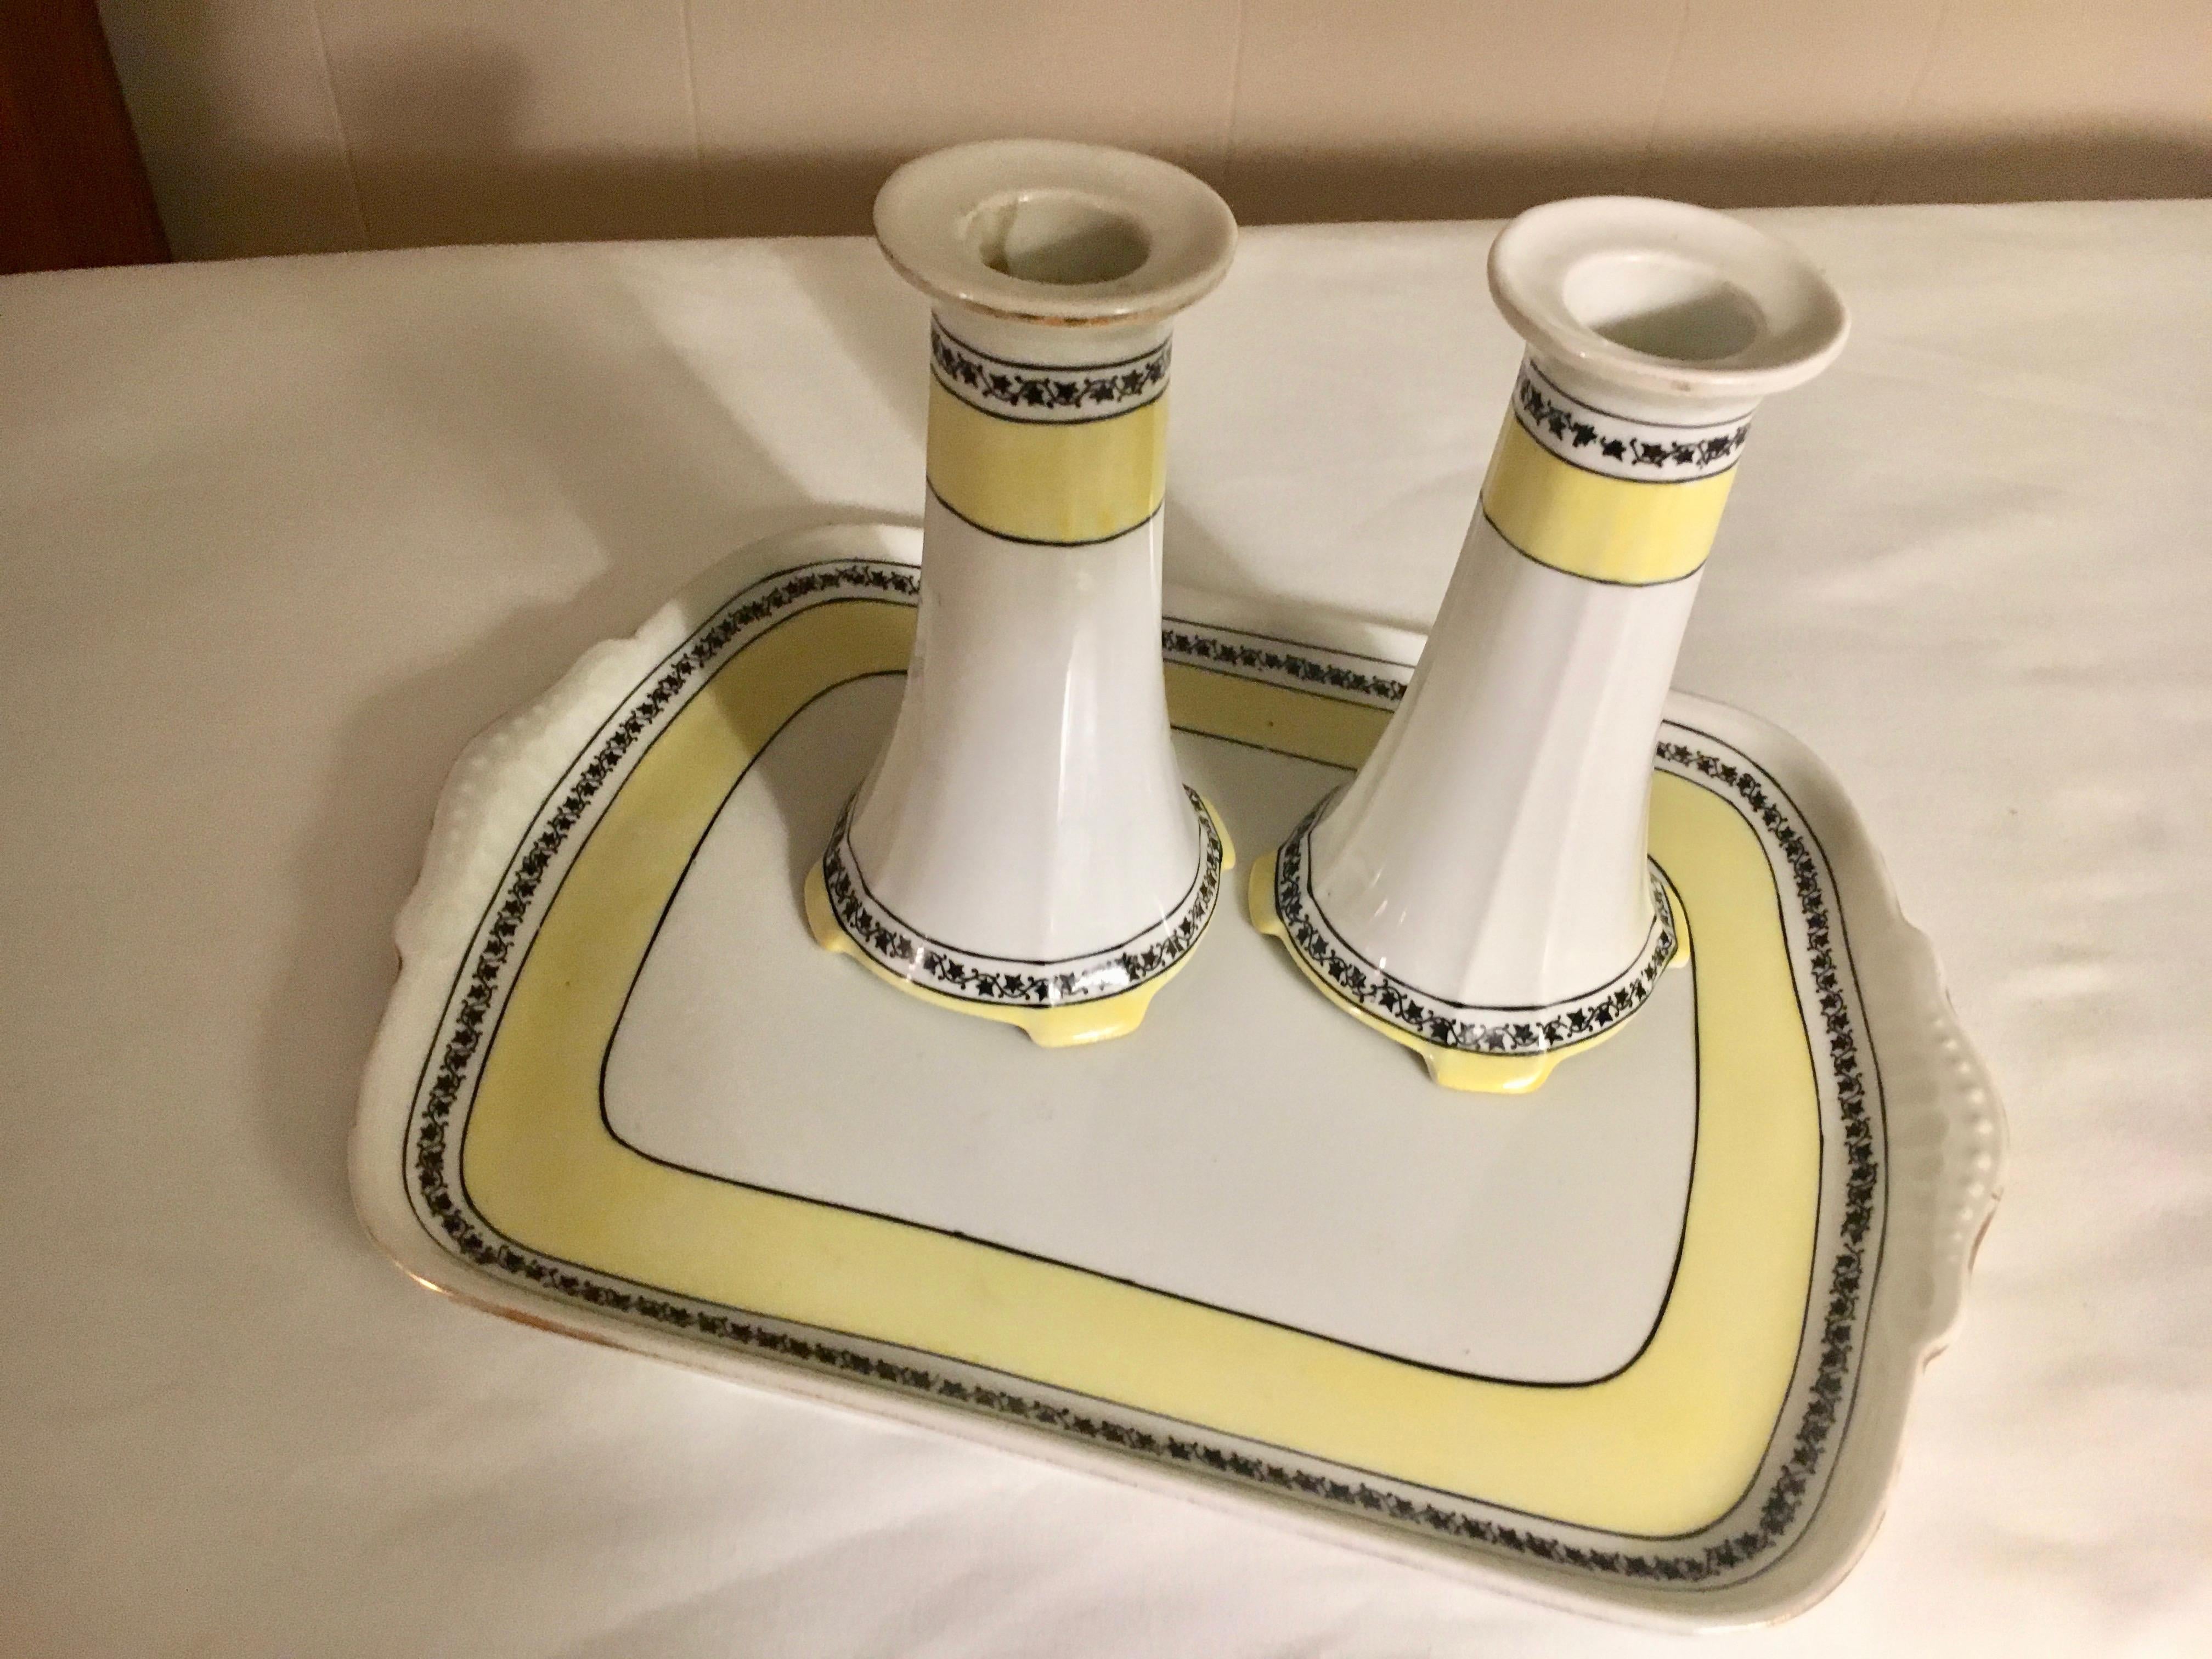 Union Bavaria Porcelain Tray and Candlesticks For Sale 4